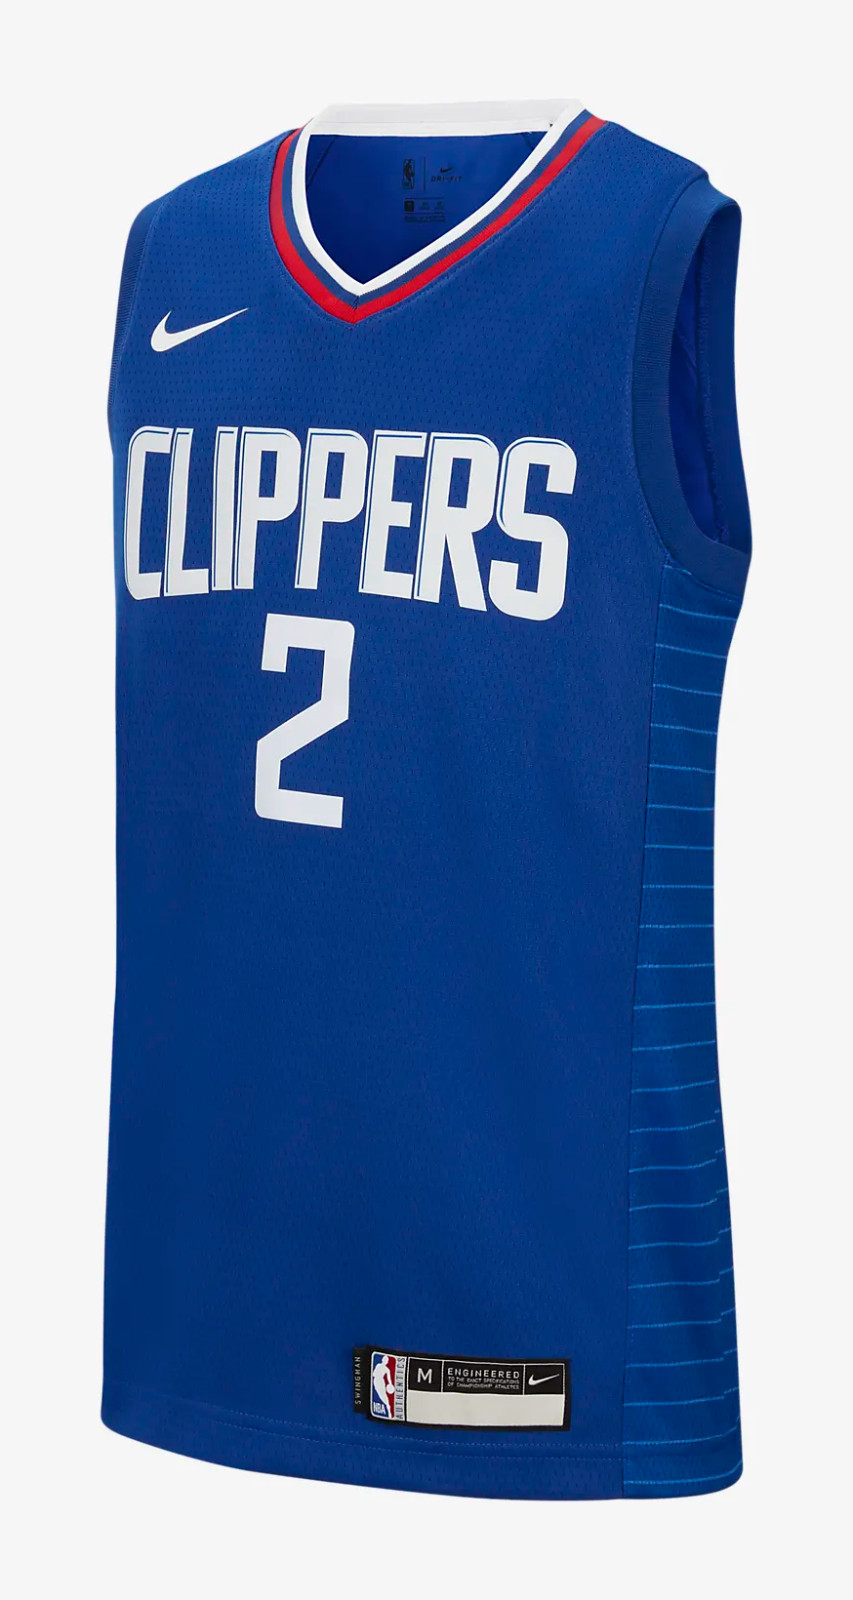 NBA Jersey Database, Los Angeles Clippers Statement Jersey 2020